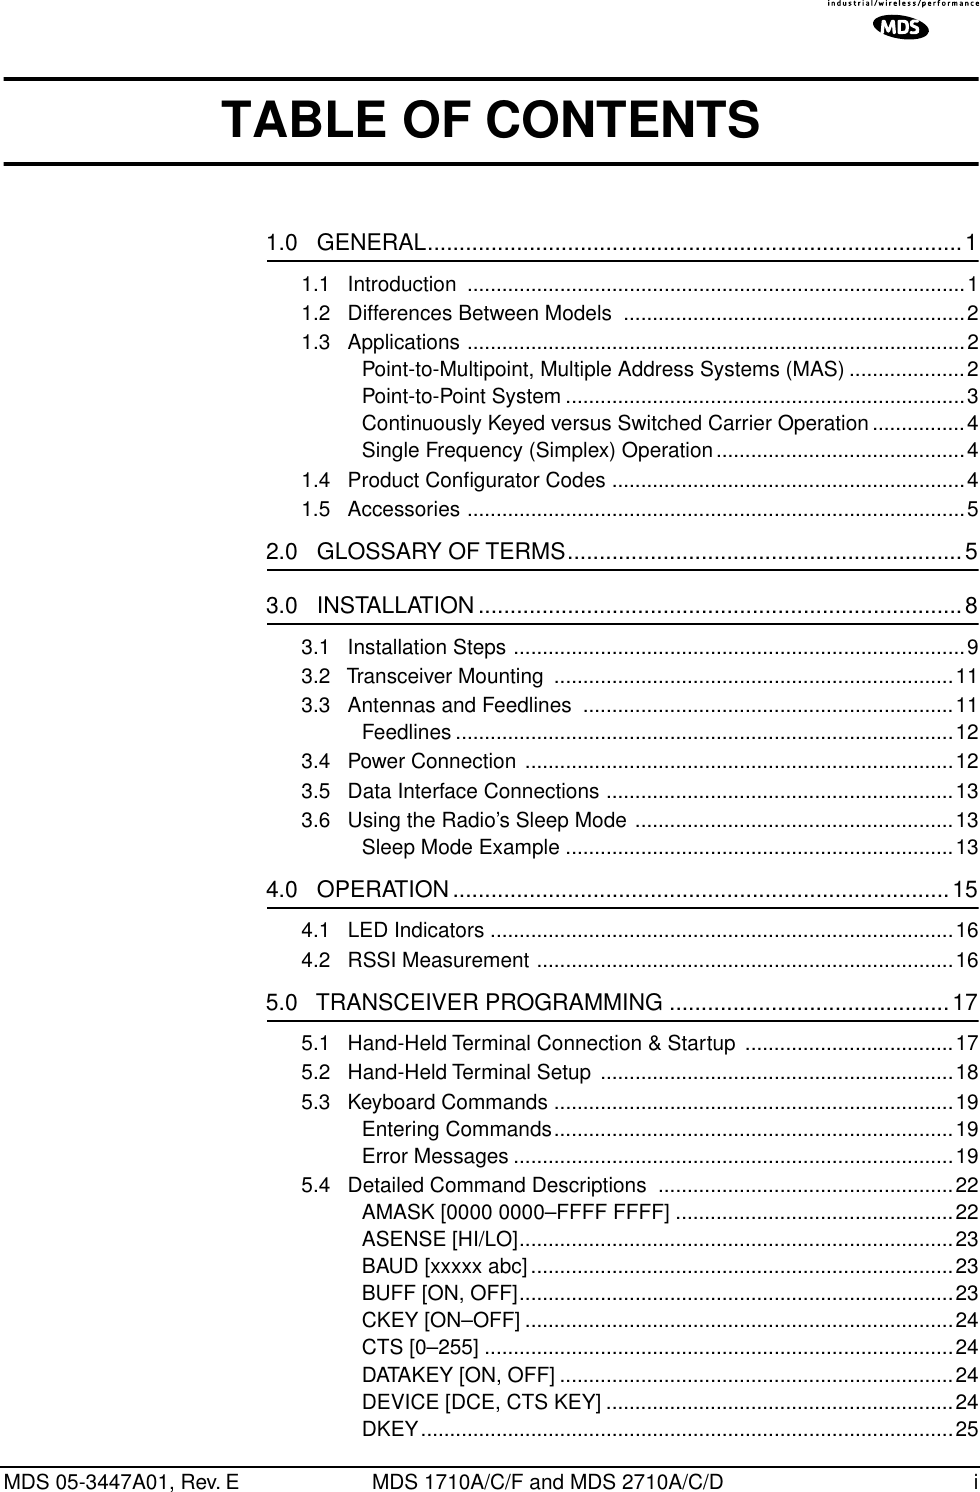  MDS 05-3447A01, Rev. E MDS 1710A/C/F and MDS 2710A/C/D i TABLE OF CONTENTS 1.0   GENERAL....................................................................................1 1.1   Introduction  ......................................................................................11.2   Differences Between Models  ...........................................................21.3   Applications ......................................................................................2Point-to-Multipoint, Multiple Address Systems (MAS) ....................2Point-to-Point System .....................................................................3Continuously Keyed versus Switched Carrier Operation ................4Single Frequency (Simplex) Operation...........................................41.4   Product Conﬁgurator Codes .............................................................41.5   Accessories ......................................................................................5 2.0   GLOSSARY OF TERMS..............................................................5 3.0   INSTALLATION............................................................................8 3.1   Installation Steps ..............................................................................93.2   Transceiver Mounting  .....................................................................113.3   Antennas and Feedlines  ................................................................11Feedlines ......................................................................................123.4   Power Connection ..........................................................................123.5   Data Interface Connections ............................................................133.6   Using the Radio’s Sleep Mode .......................................................13Sleep Mode Example ...................................................................13 4.0   OPERATION ..............................................................................15 4.1   LED Indicators ................................................................................164.2   RSSI Measurement ........................................................................16 5.0   TRANSCEIVER PROGRAMMING ............................................17 5.1   Hand-Held Terminal Connection &amp; Startup  ....................................175.2   Hand-Held Terminal Setup .............................................................185.3   Keyboard Commands .....................................................................19Entering Commands.....................................................................19Error Messages ............................................................................195.4   Detailed Command Descriptions  ...................................................22AMASK [0000 0000–FFFF FFFF] ................................................22ASENSE [HI/LO]...........................................................................23BAUD [xxxxx abc] .........................................................................23BUFF [ON, OFF]...........................................................................23CKEY [ON–OFF] ..........................................................................24CTS [0–255] .................................................................................24DATAKEY [ON, OFF] ....................................................................24DEVICE [DCE, CTS KEY] ............................................................24DKEY............................................................................................25